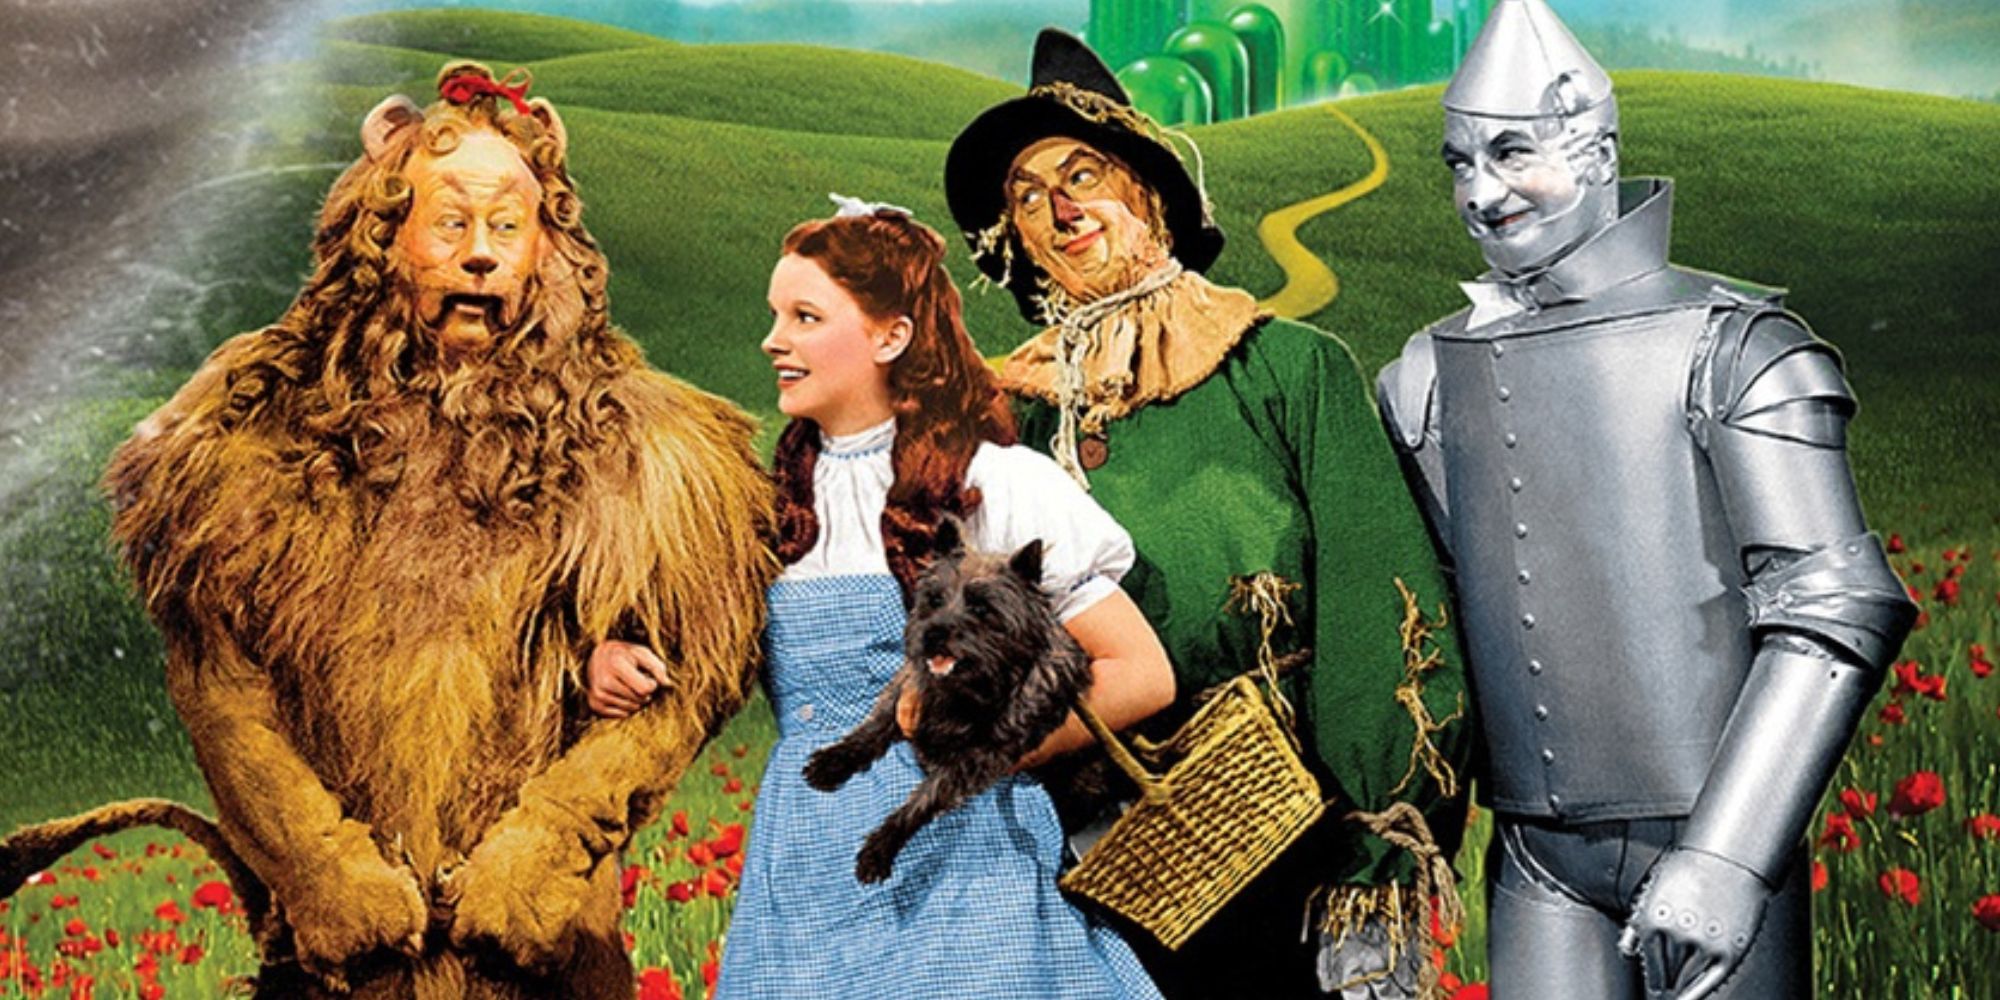 The lion, Dorothy, the scarecrow, and the tin man on the yellow brick road in The Wizard Of Oz